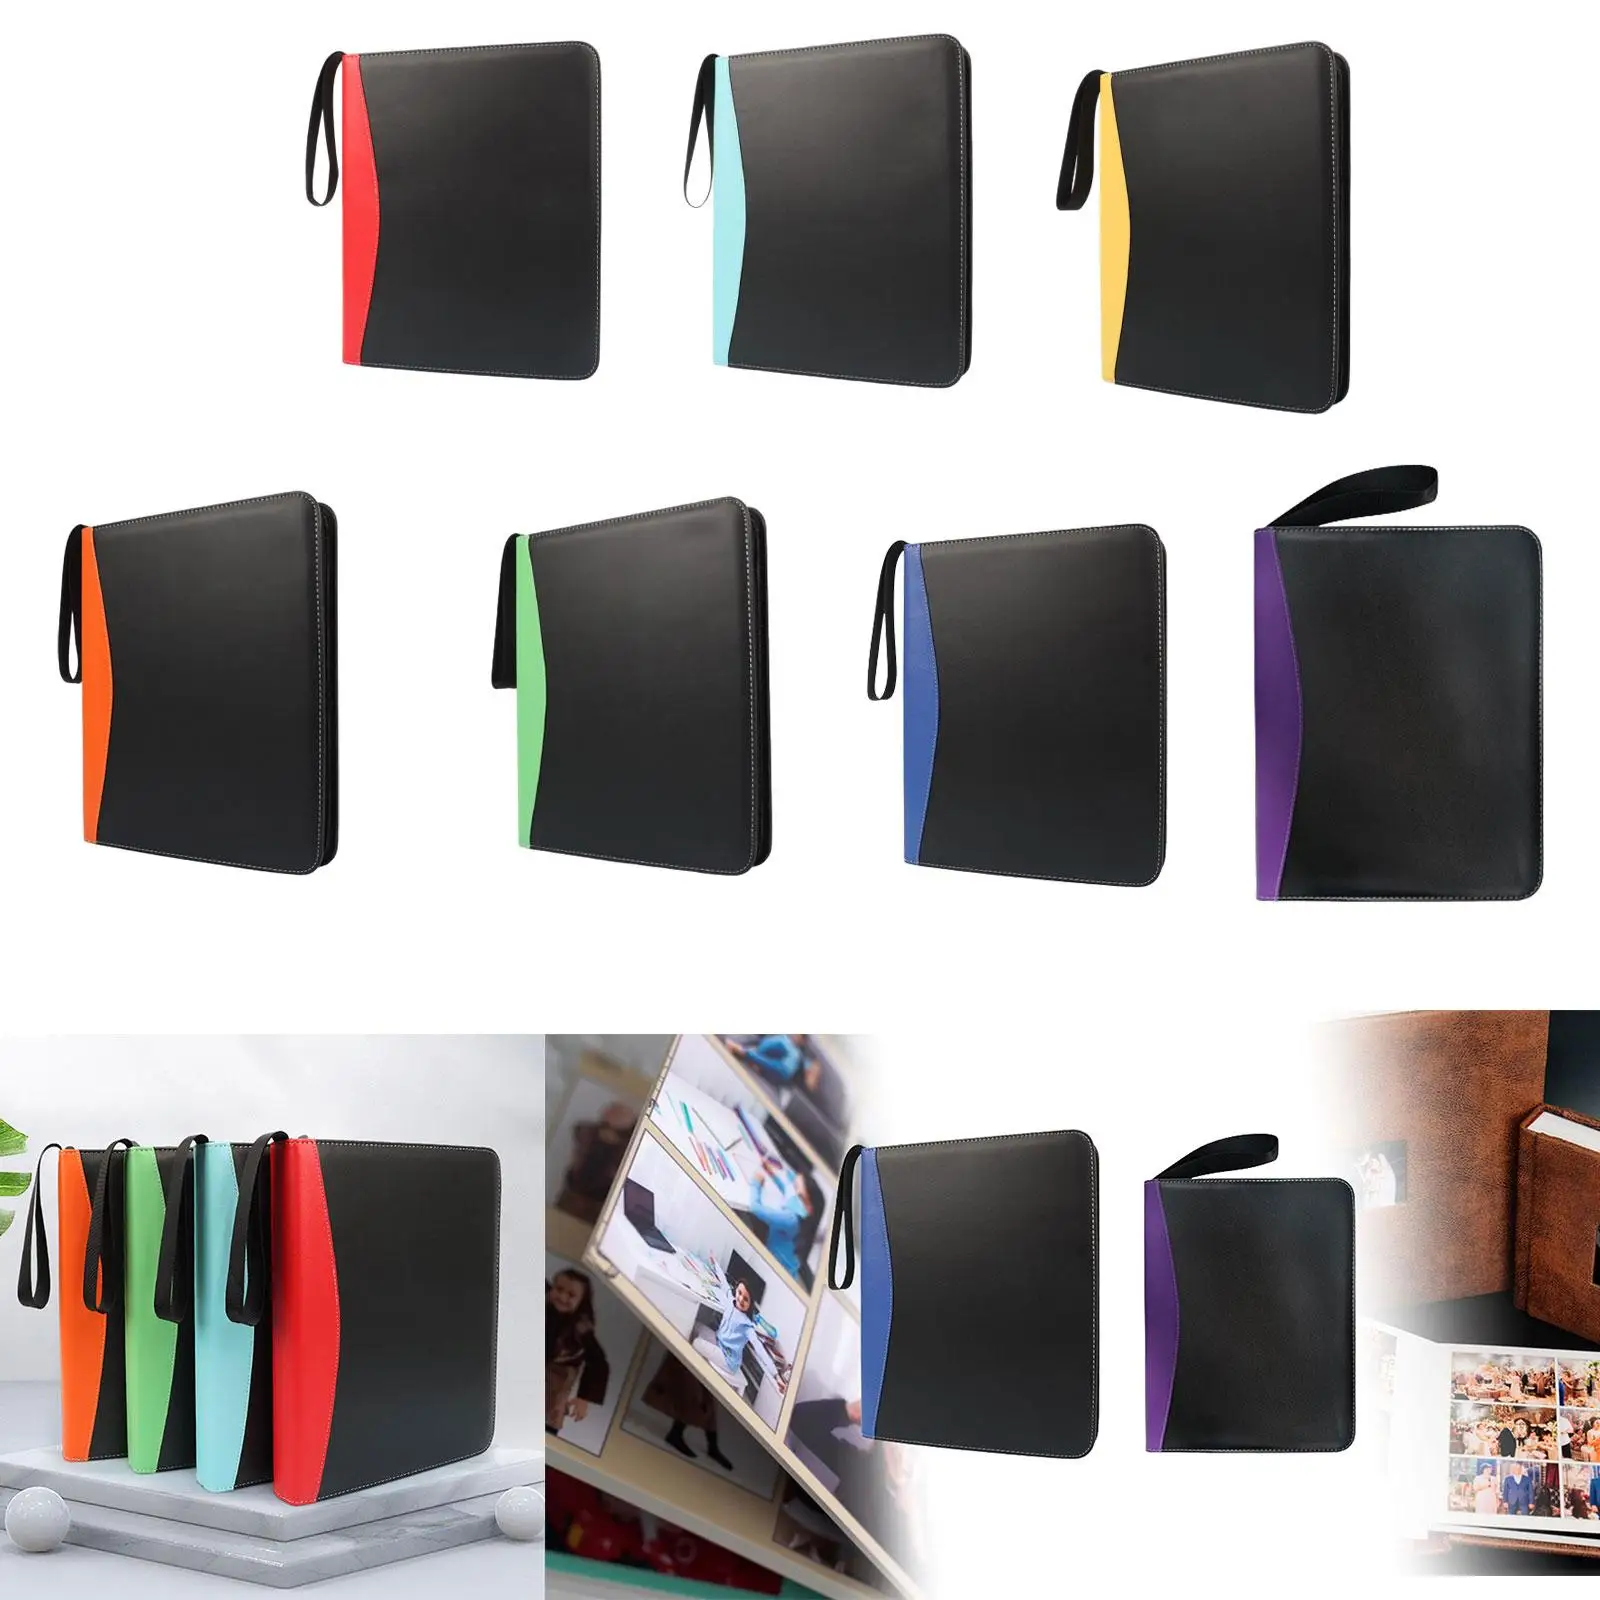 

9 Pocket Waterproof Trading Picture Binder Album Card Holder Trading Album Display Holder for Football Play Cards Gaming Cards